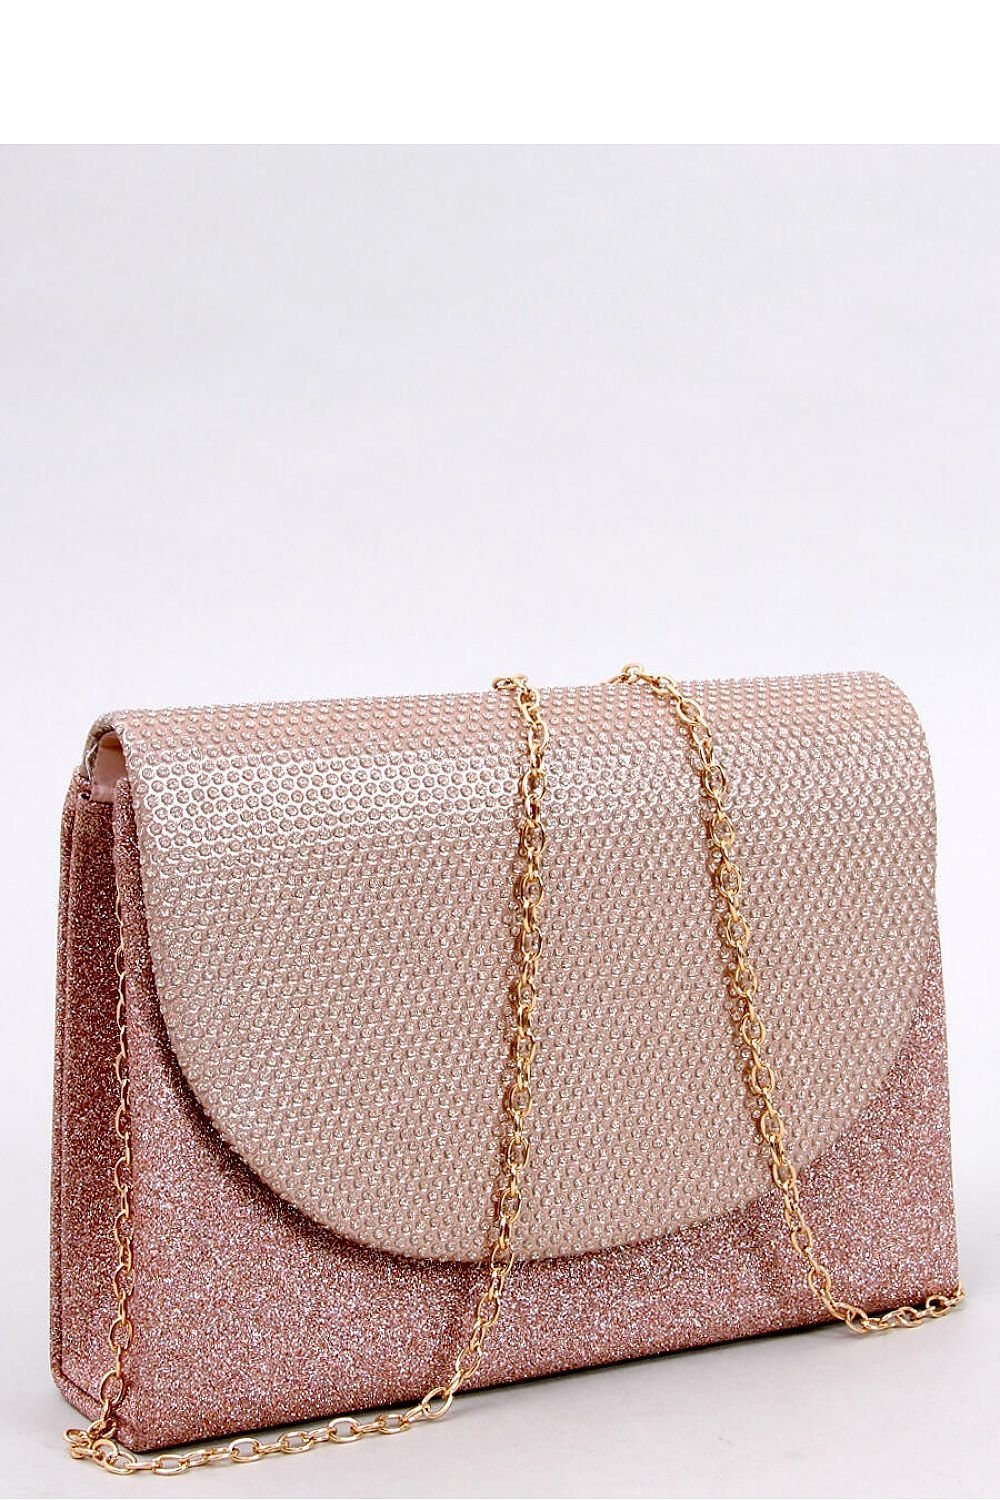 Envelope clutch bag - M&H FashionEnvelope clutch bagM&H FashionM&H Fashion189610_1103868one-size-fits-allEnvelope clutch bag InelloM&H FashionM&H FashionVisiting handbag - a clutch bag for women. It can be worn in two ways ? classically in hand or on a delicate chain. It is fastened with a magnetic clasp, and inside Envelope clutch bag